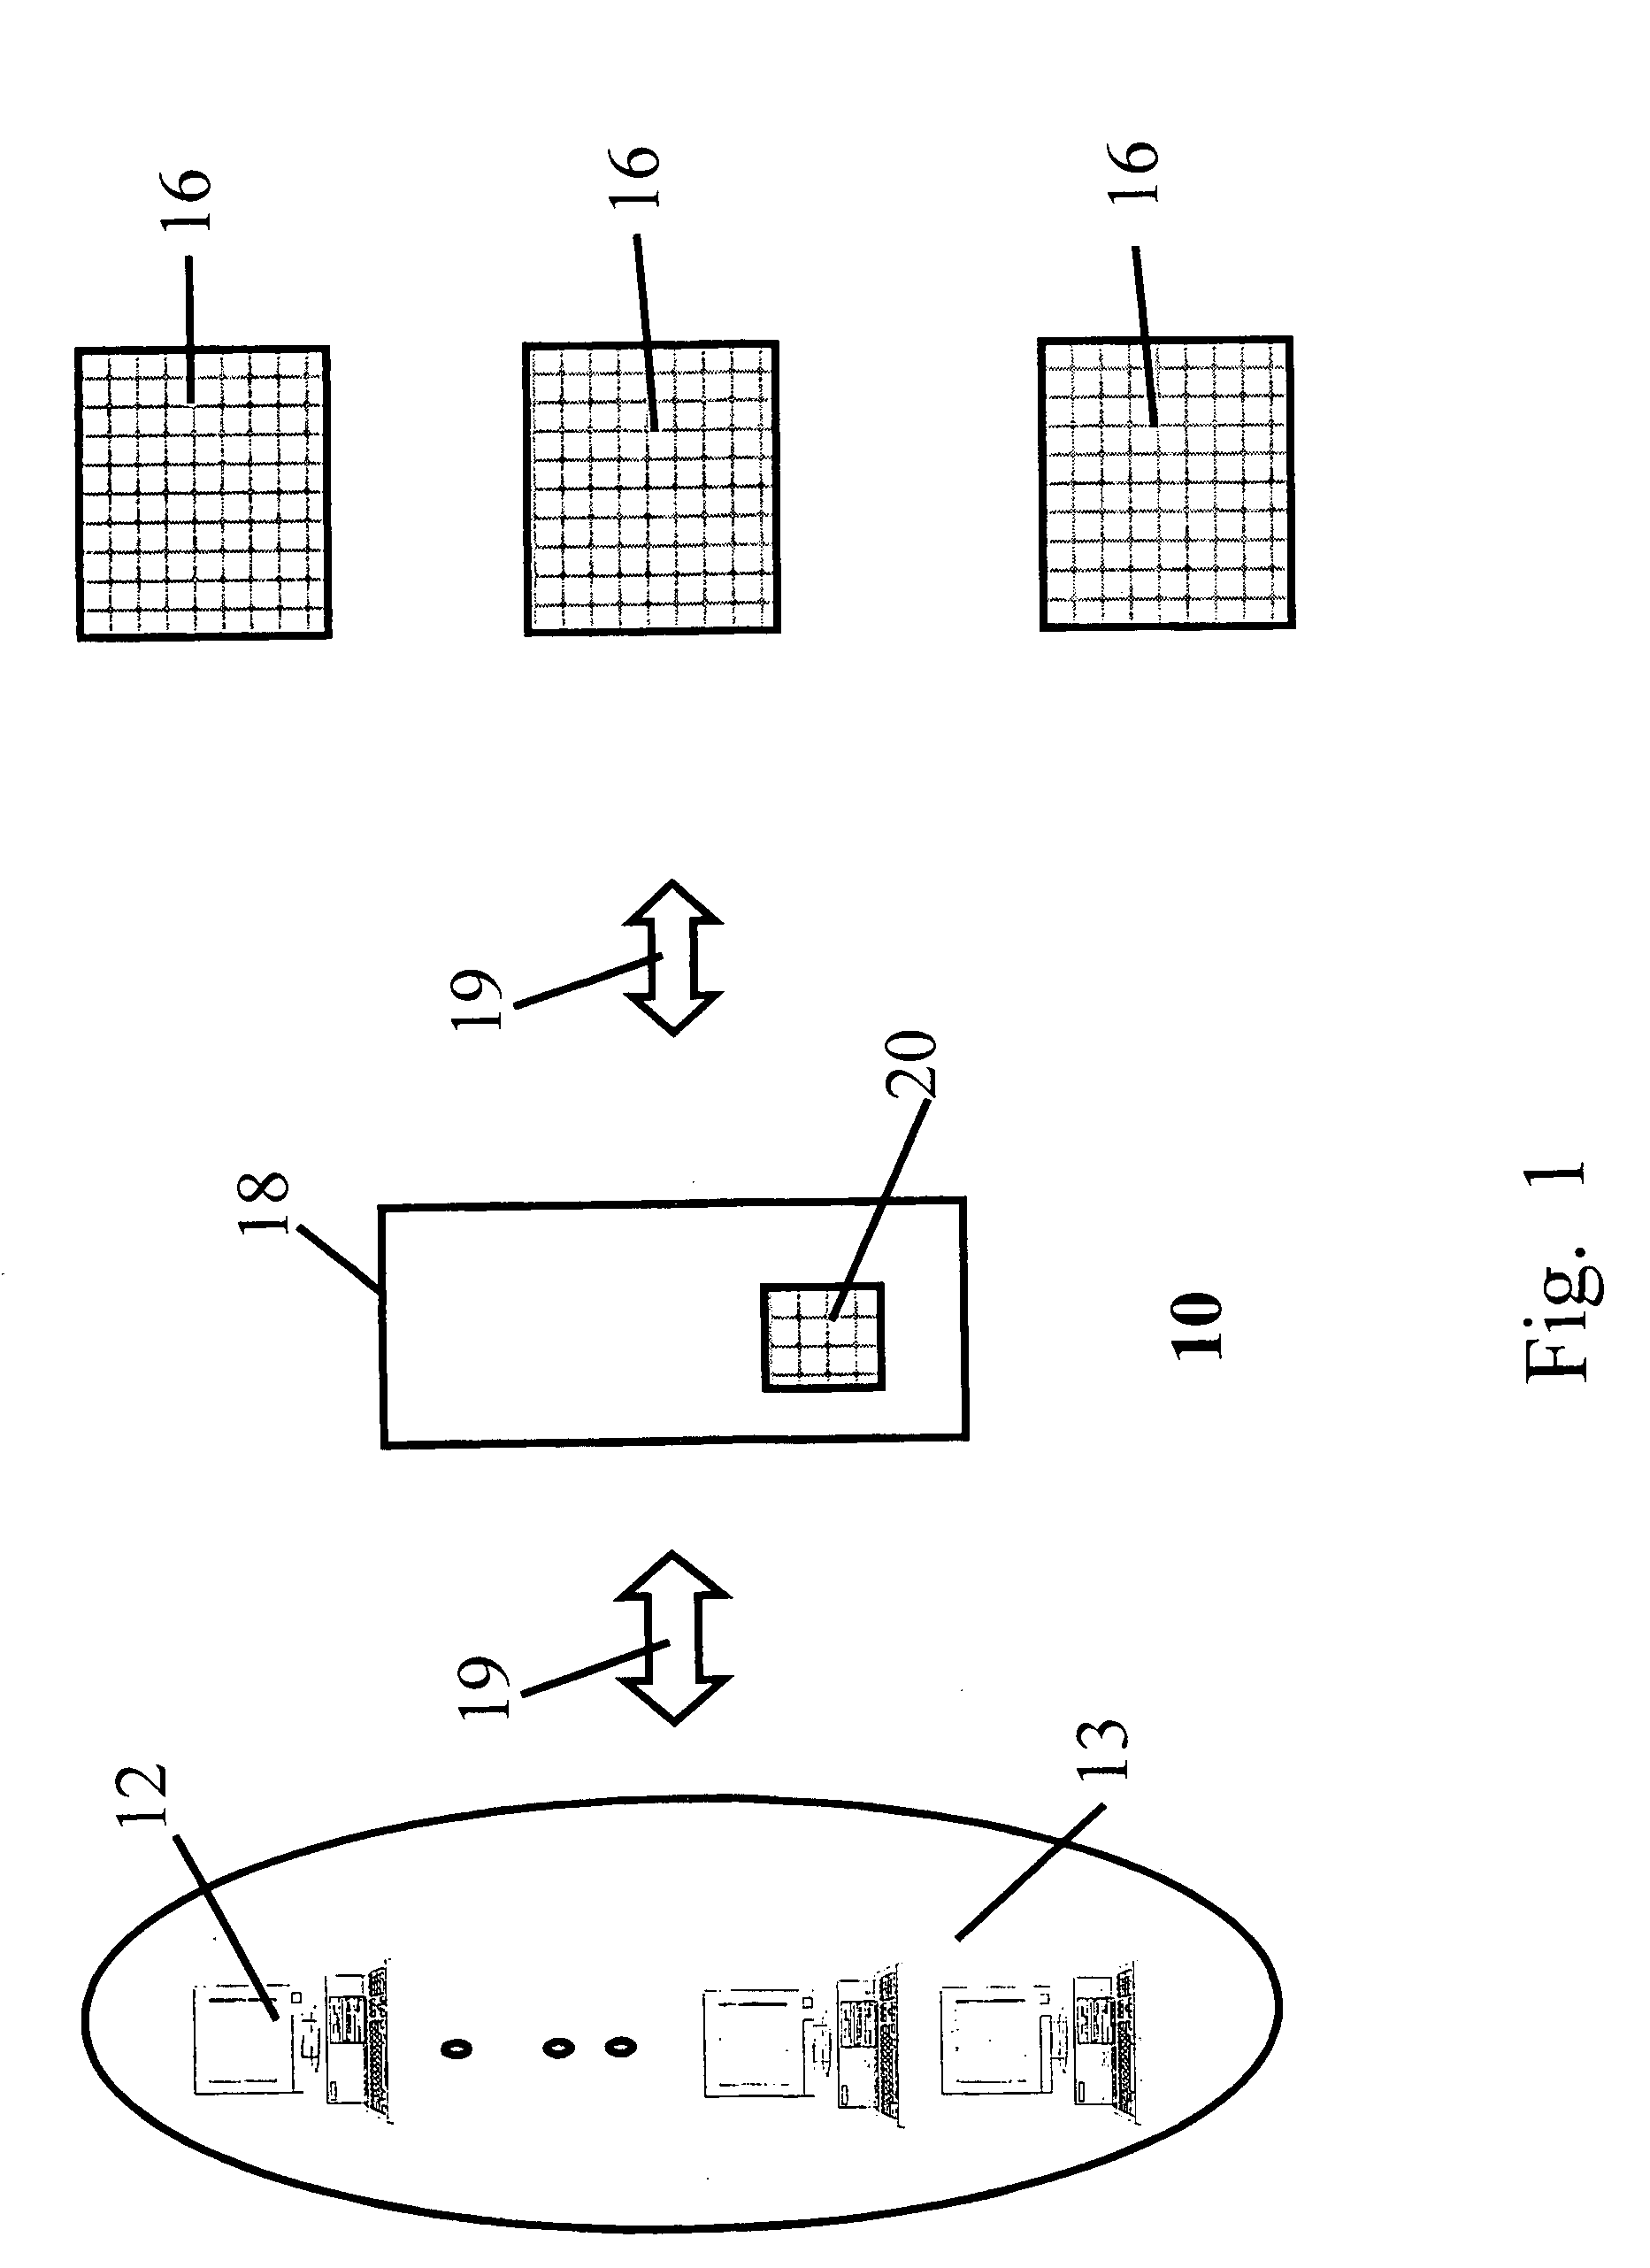 Interactive prescription processing and managing system